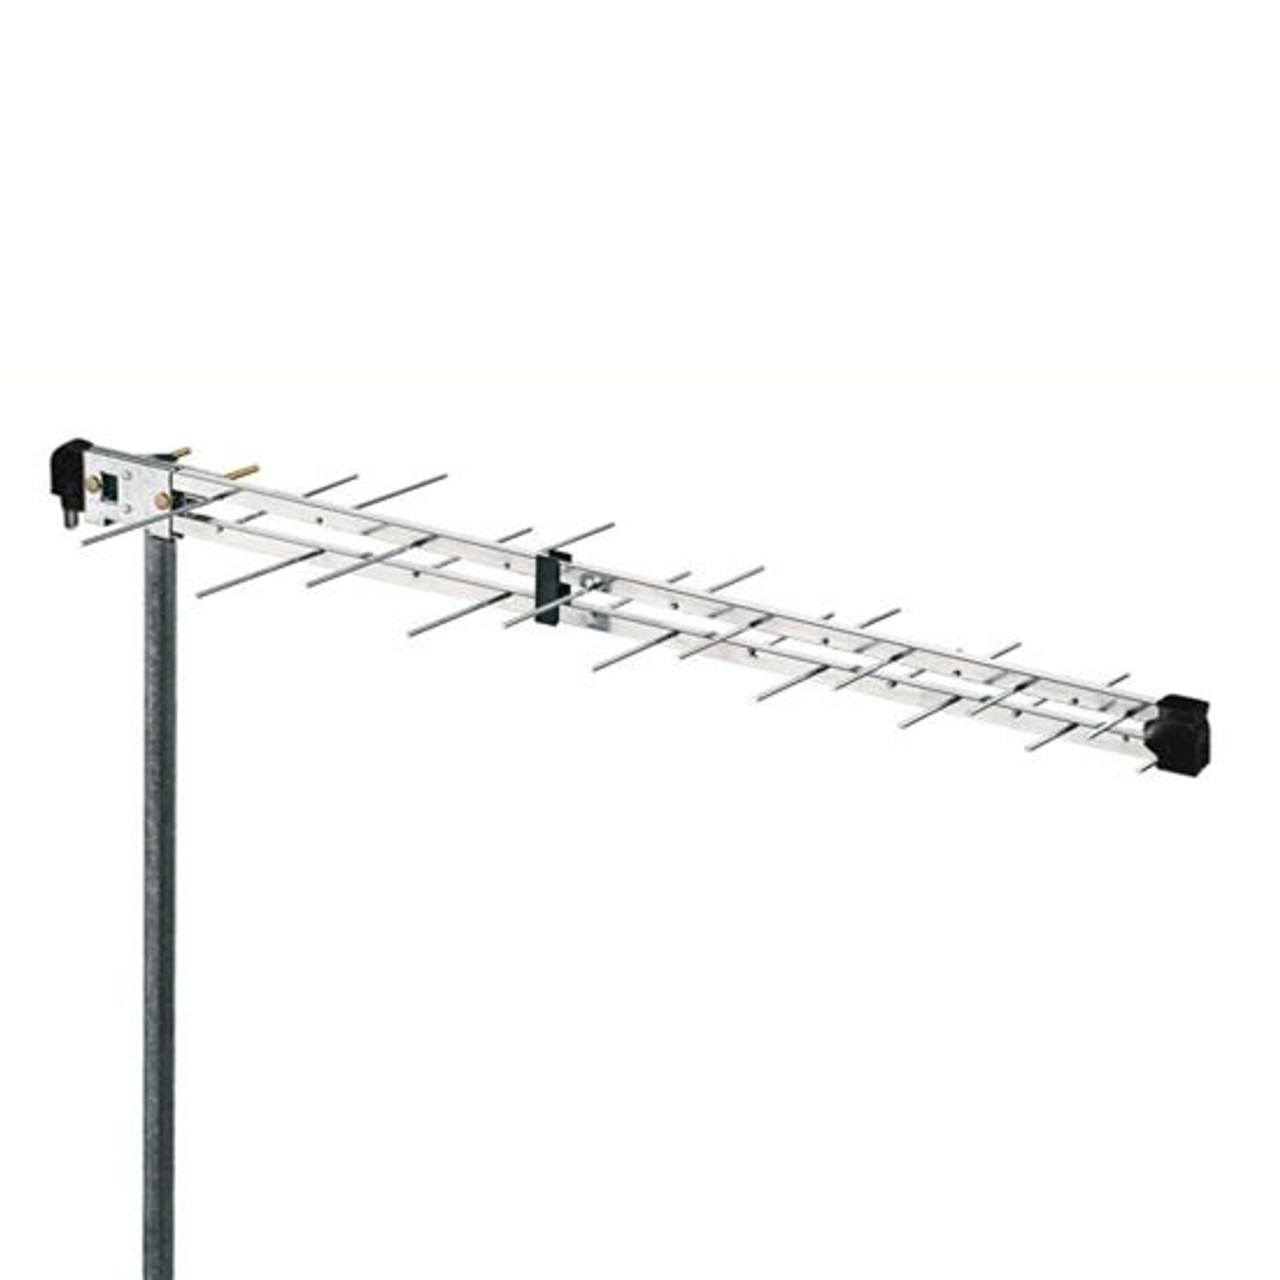 Fracarro LP45F Log Periodic UHF HDTV Antenna Digital TV Outdoor Off-Air Signal Directional Aerial  FREE 50 FT of RG6 Coax